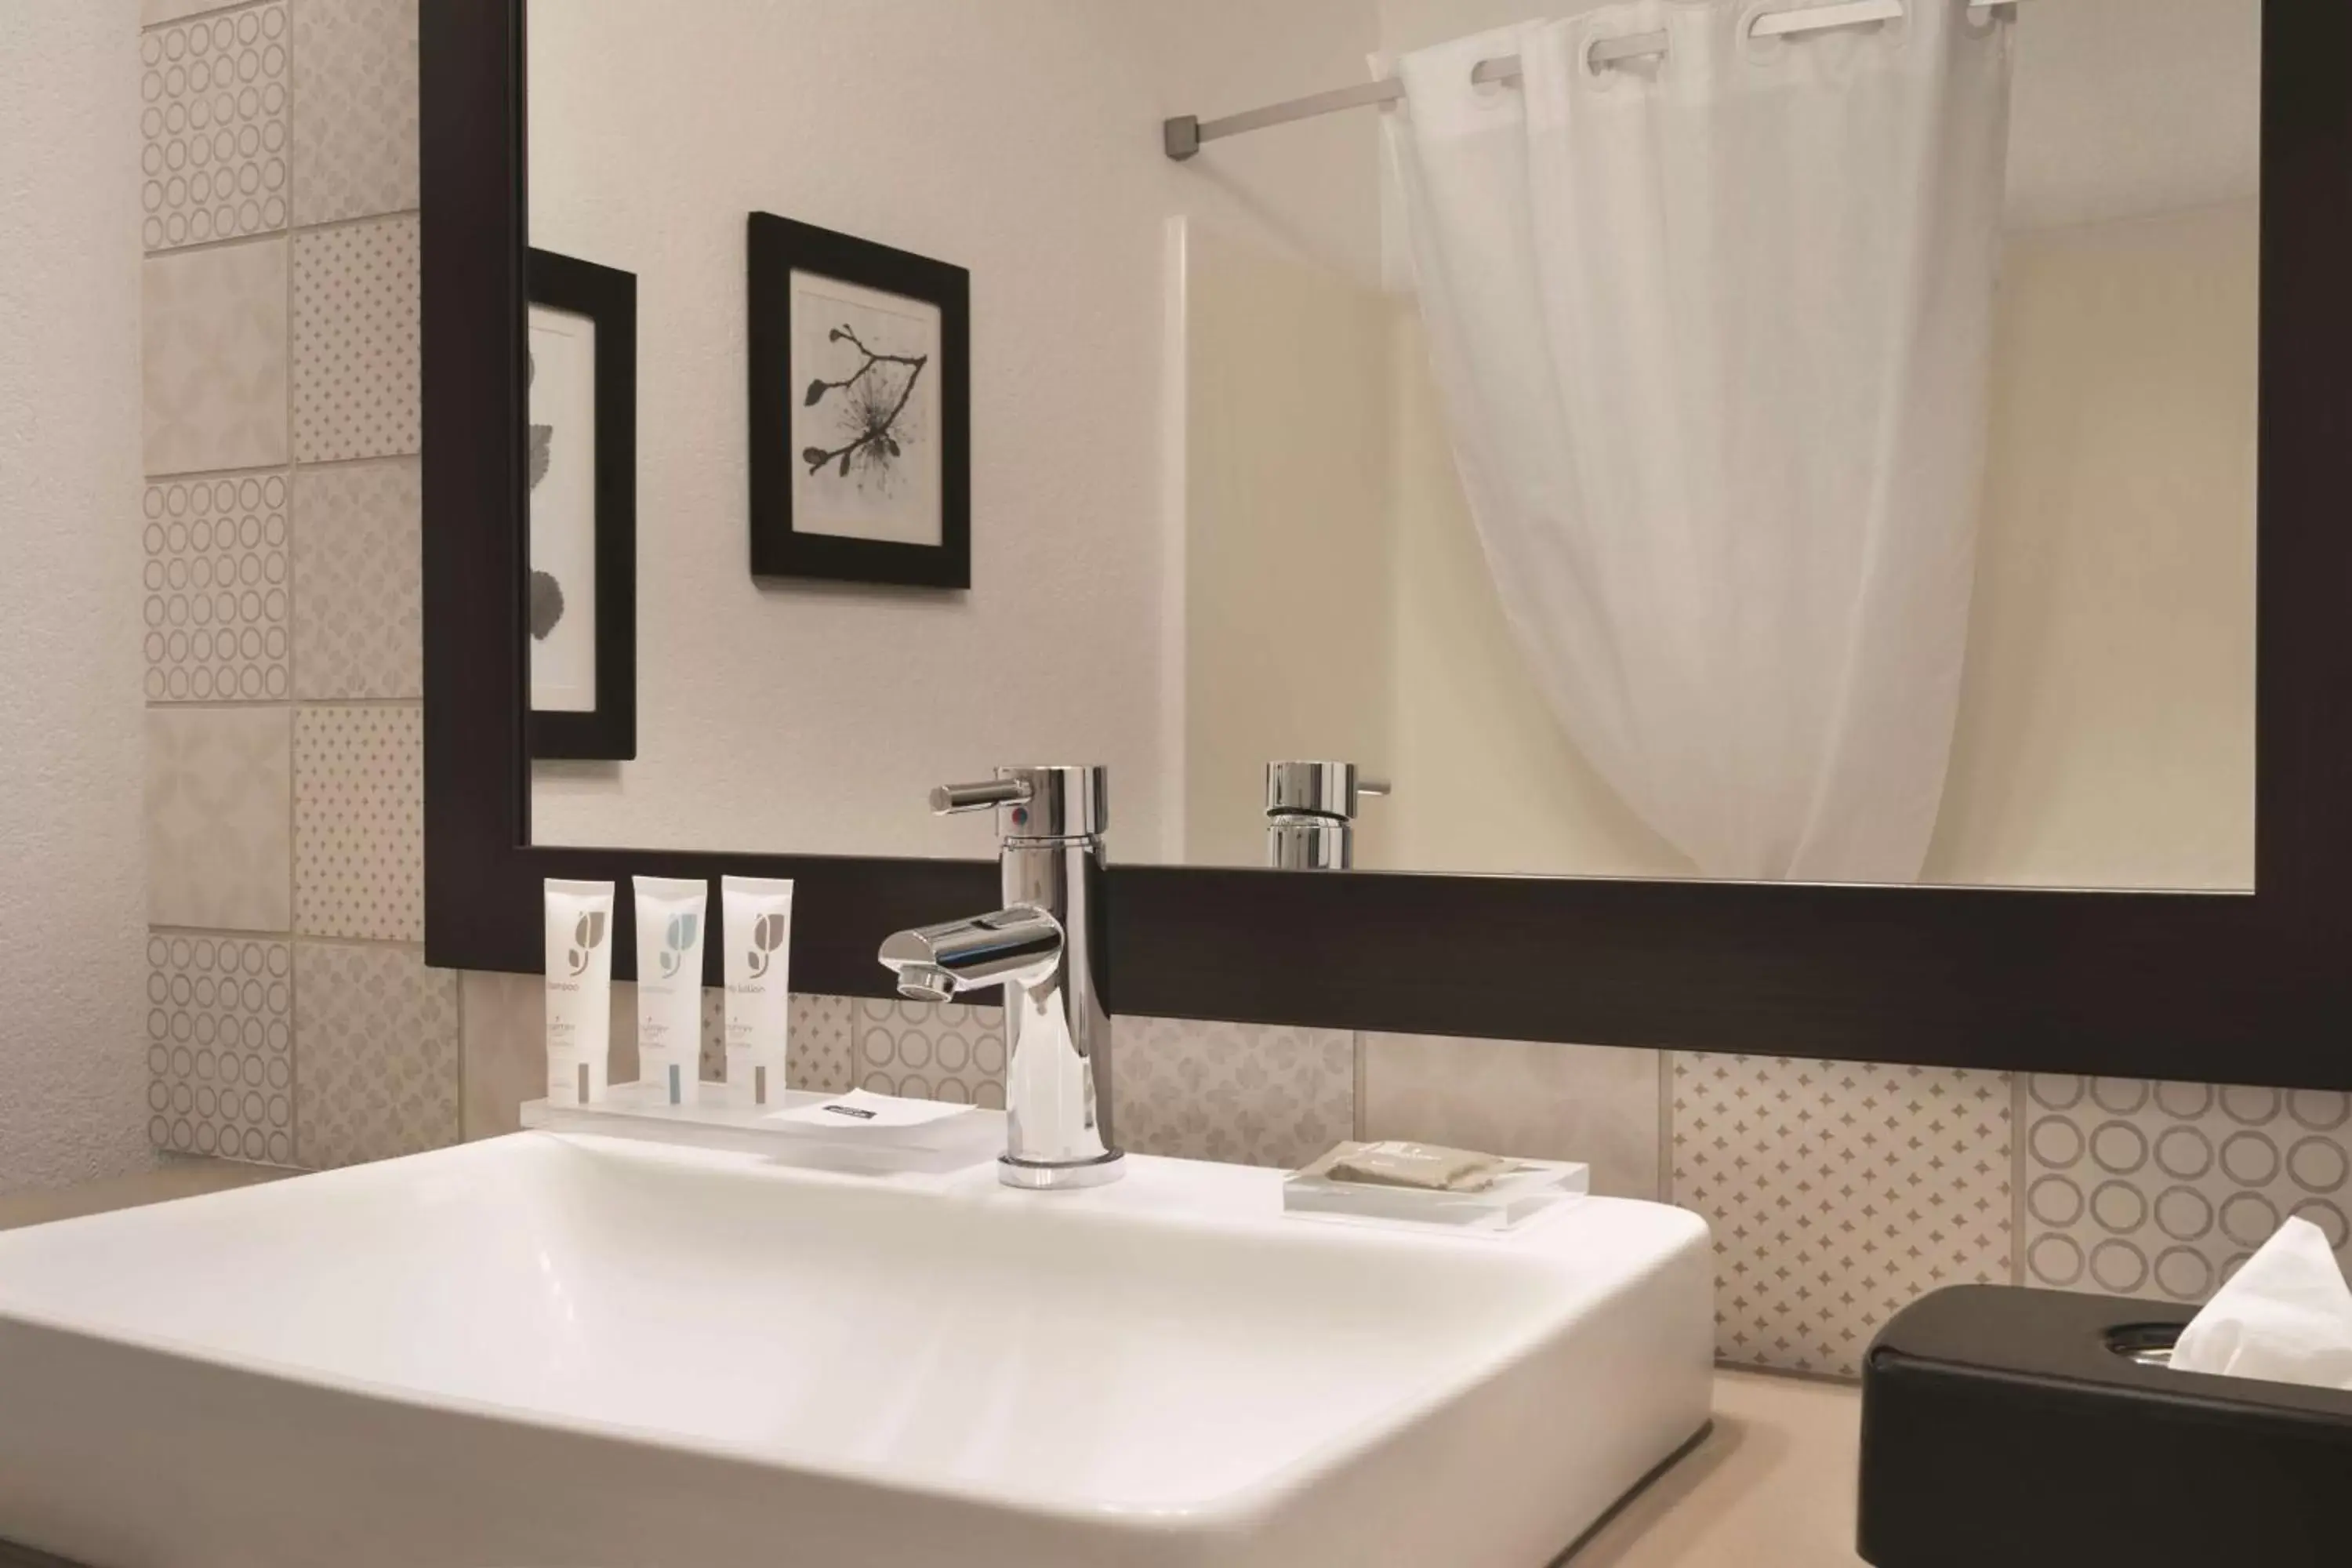 Bathroom in Country Inn & Suites by Radisson, Detroit Lakes, MN